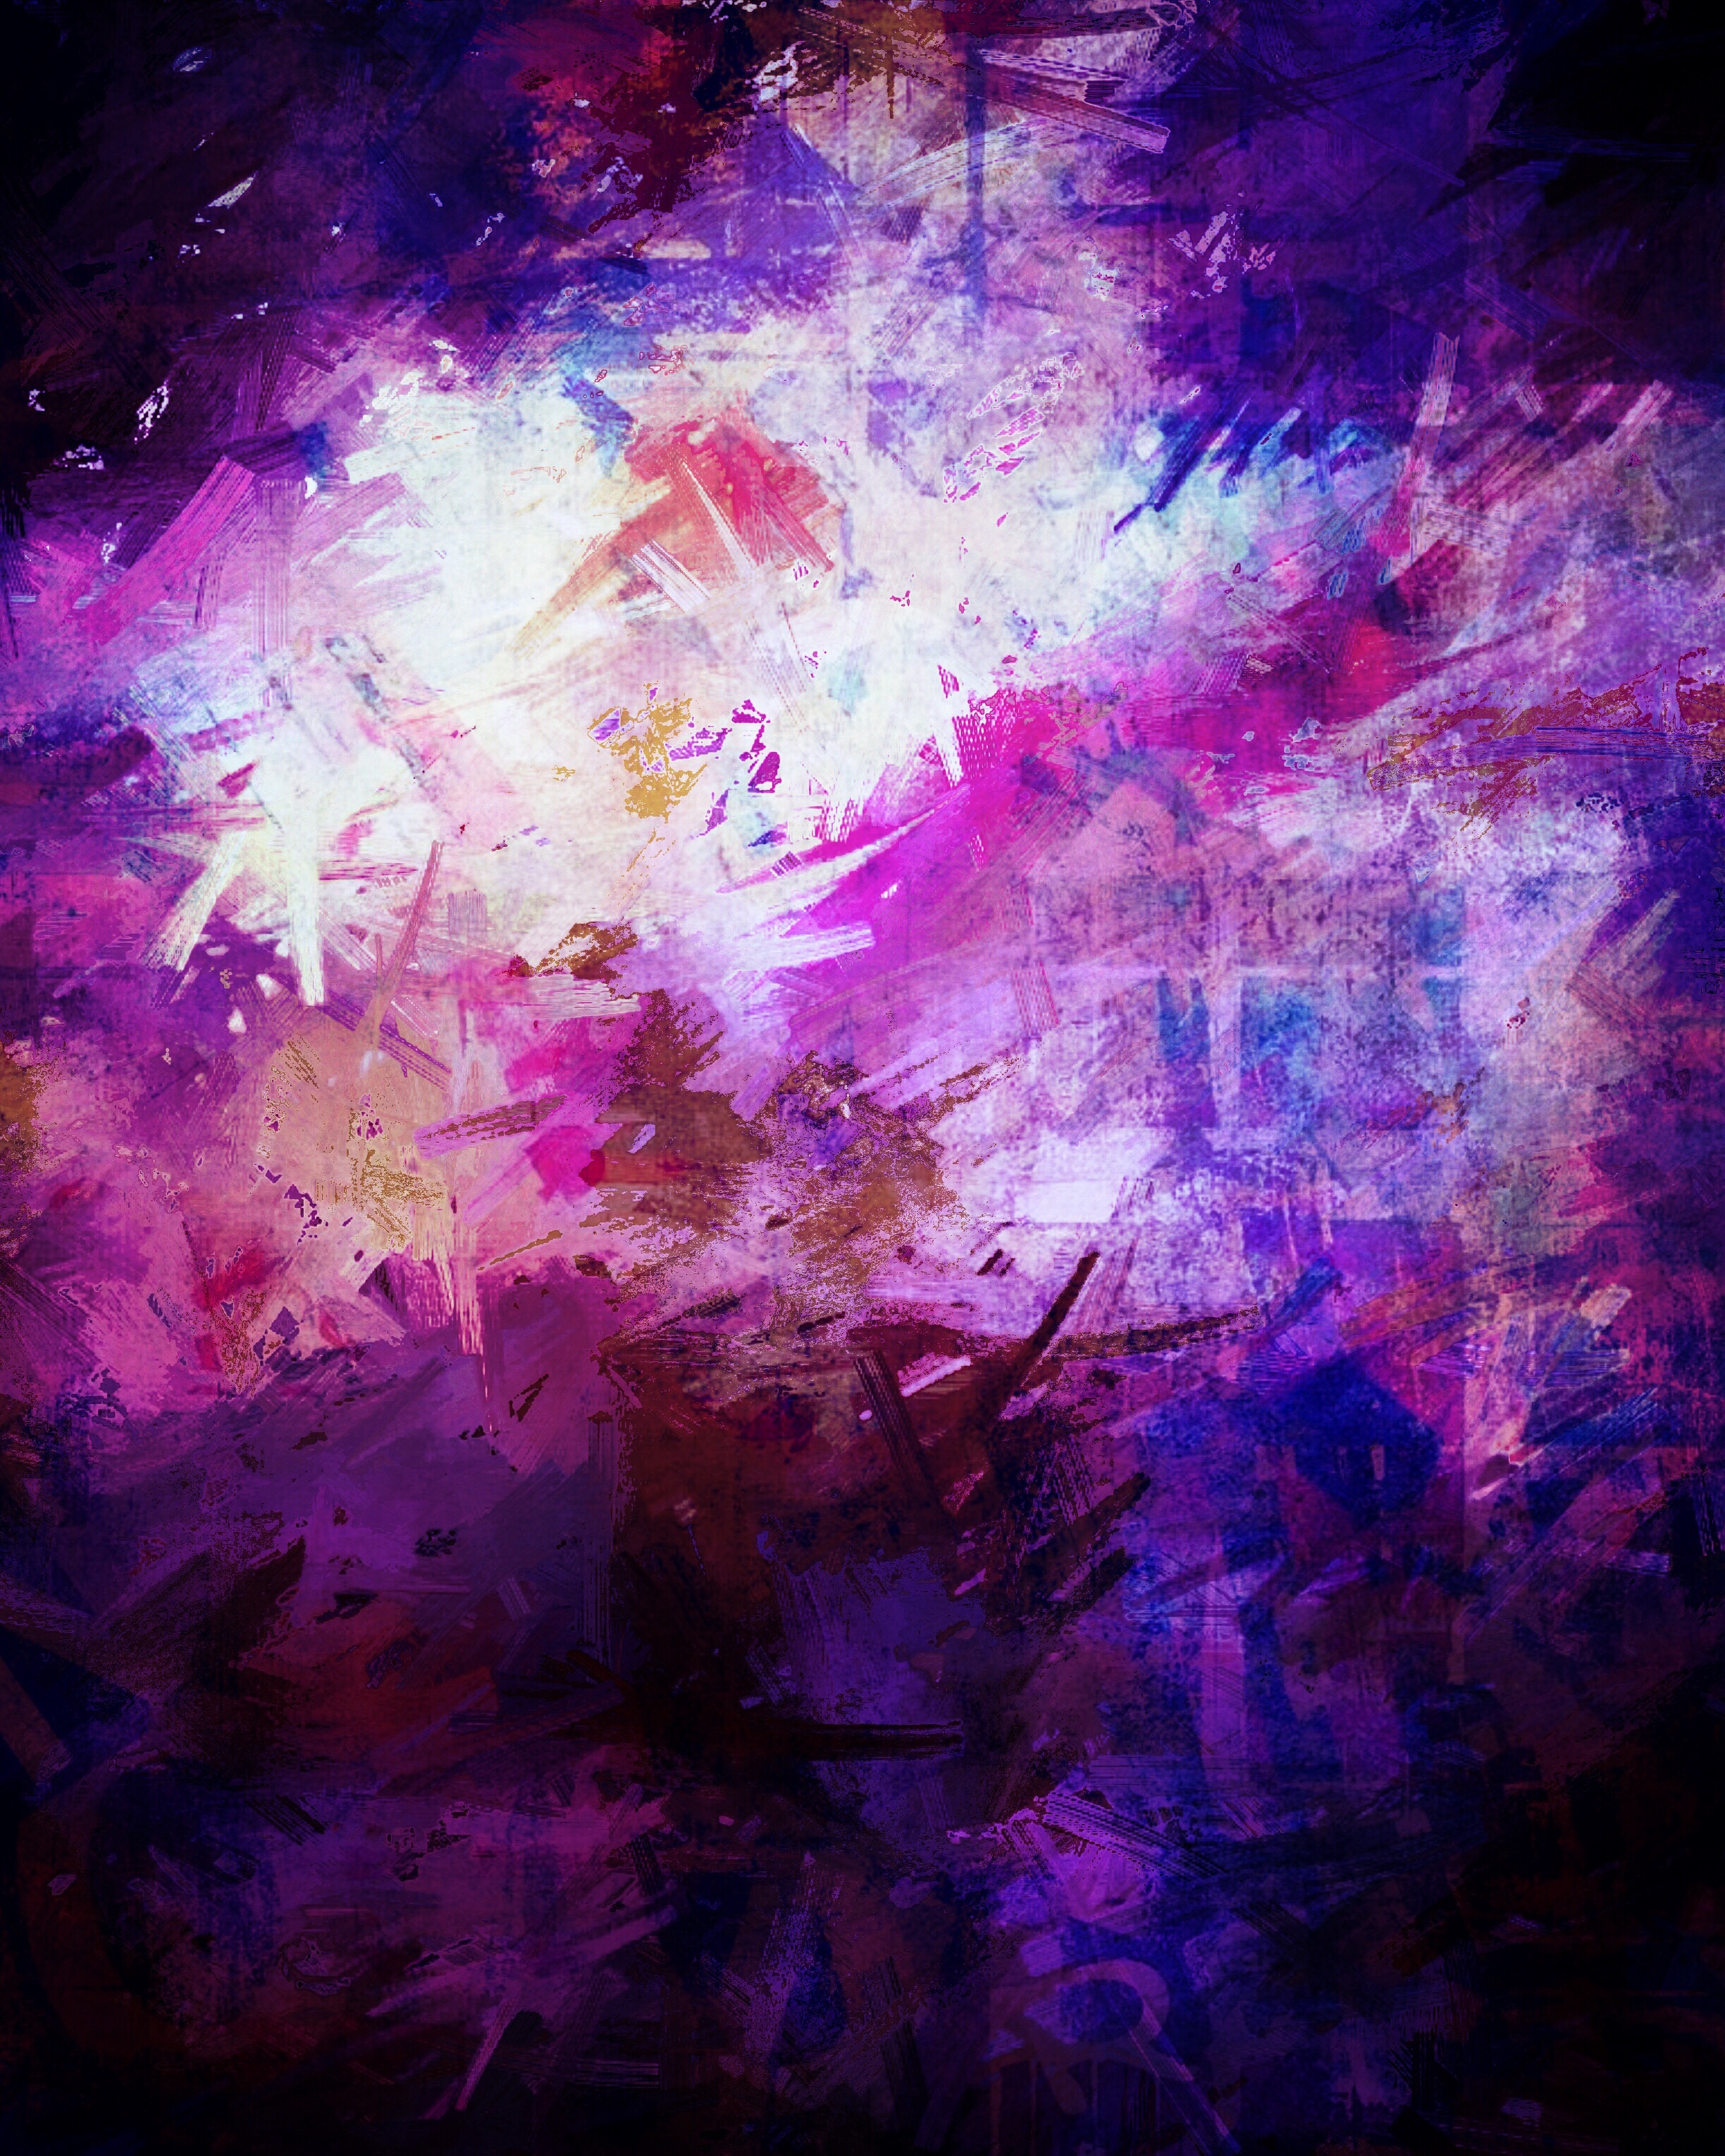 86073 download wallpaper purple, abstract, violet, dark, lines, stains, spots screensavers and pictures for free